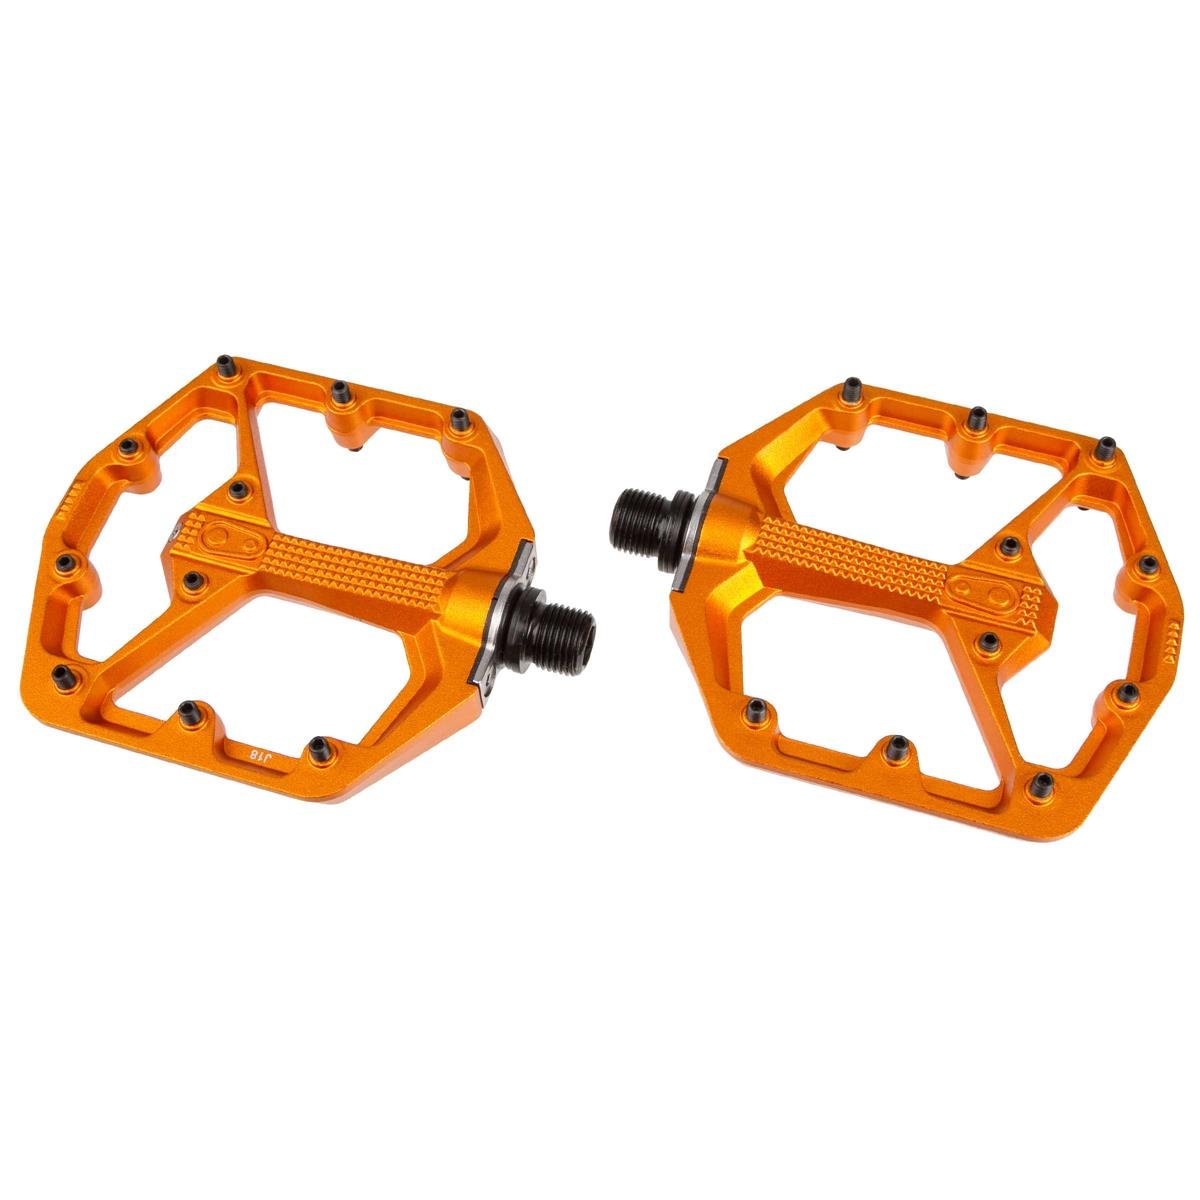 Crankbrothers Pedals Stamp 7 Limited Edition, Orange, Small